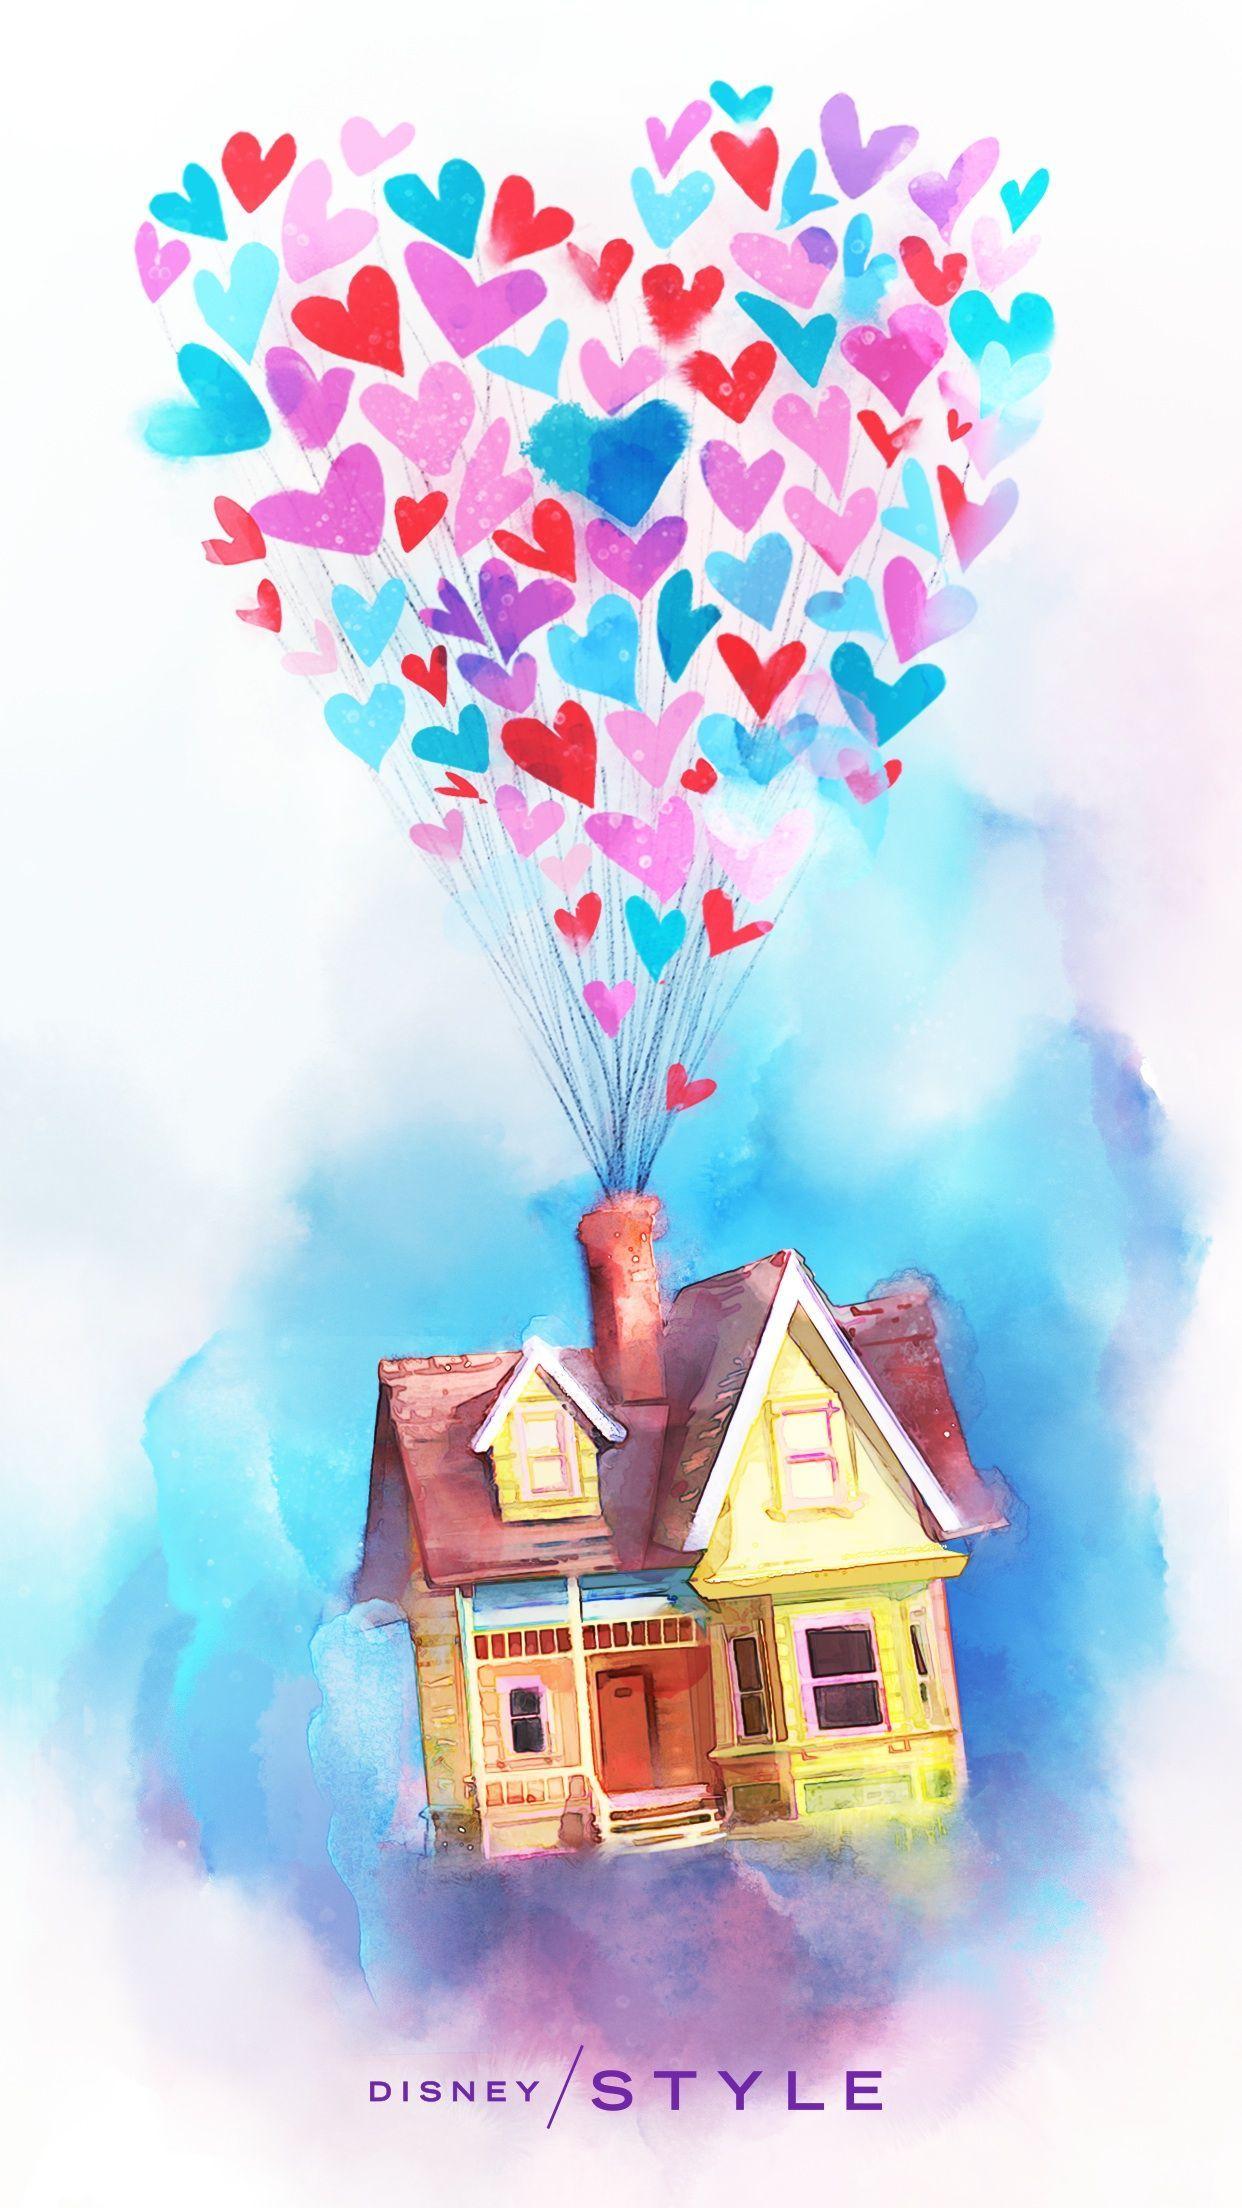 Celebrate Valentine's Day with these adorable phone wallpaper